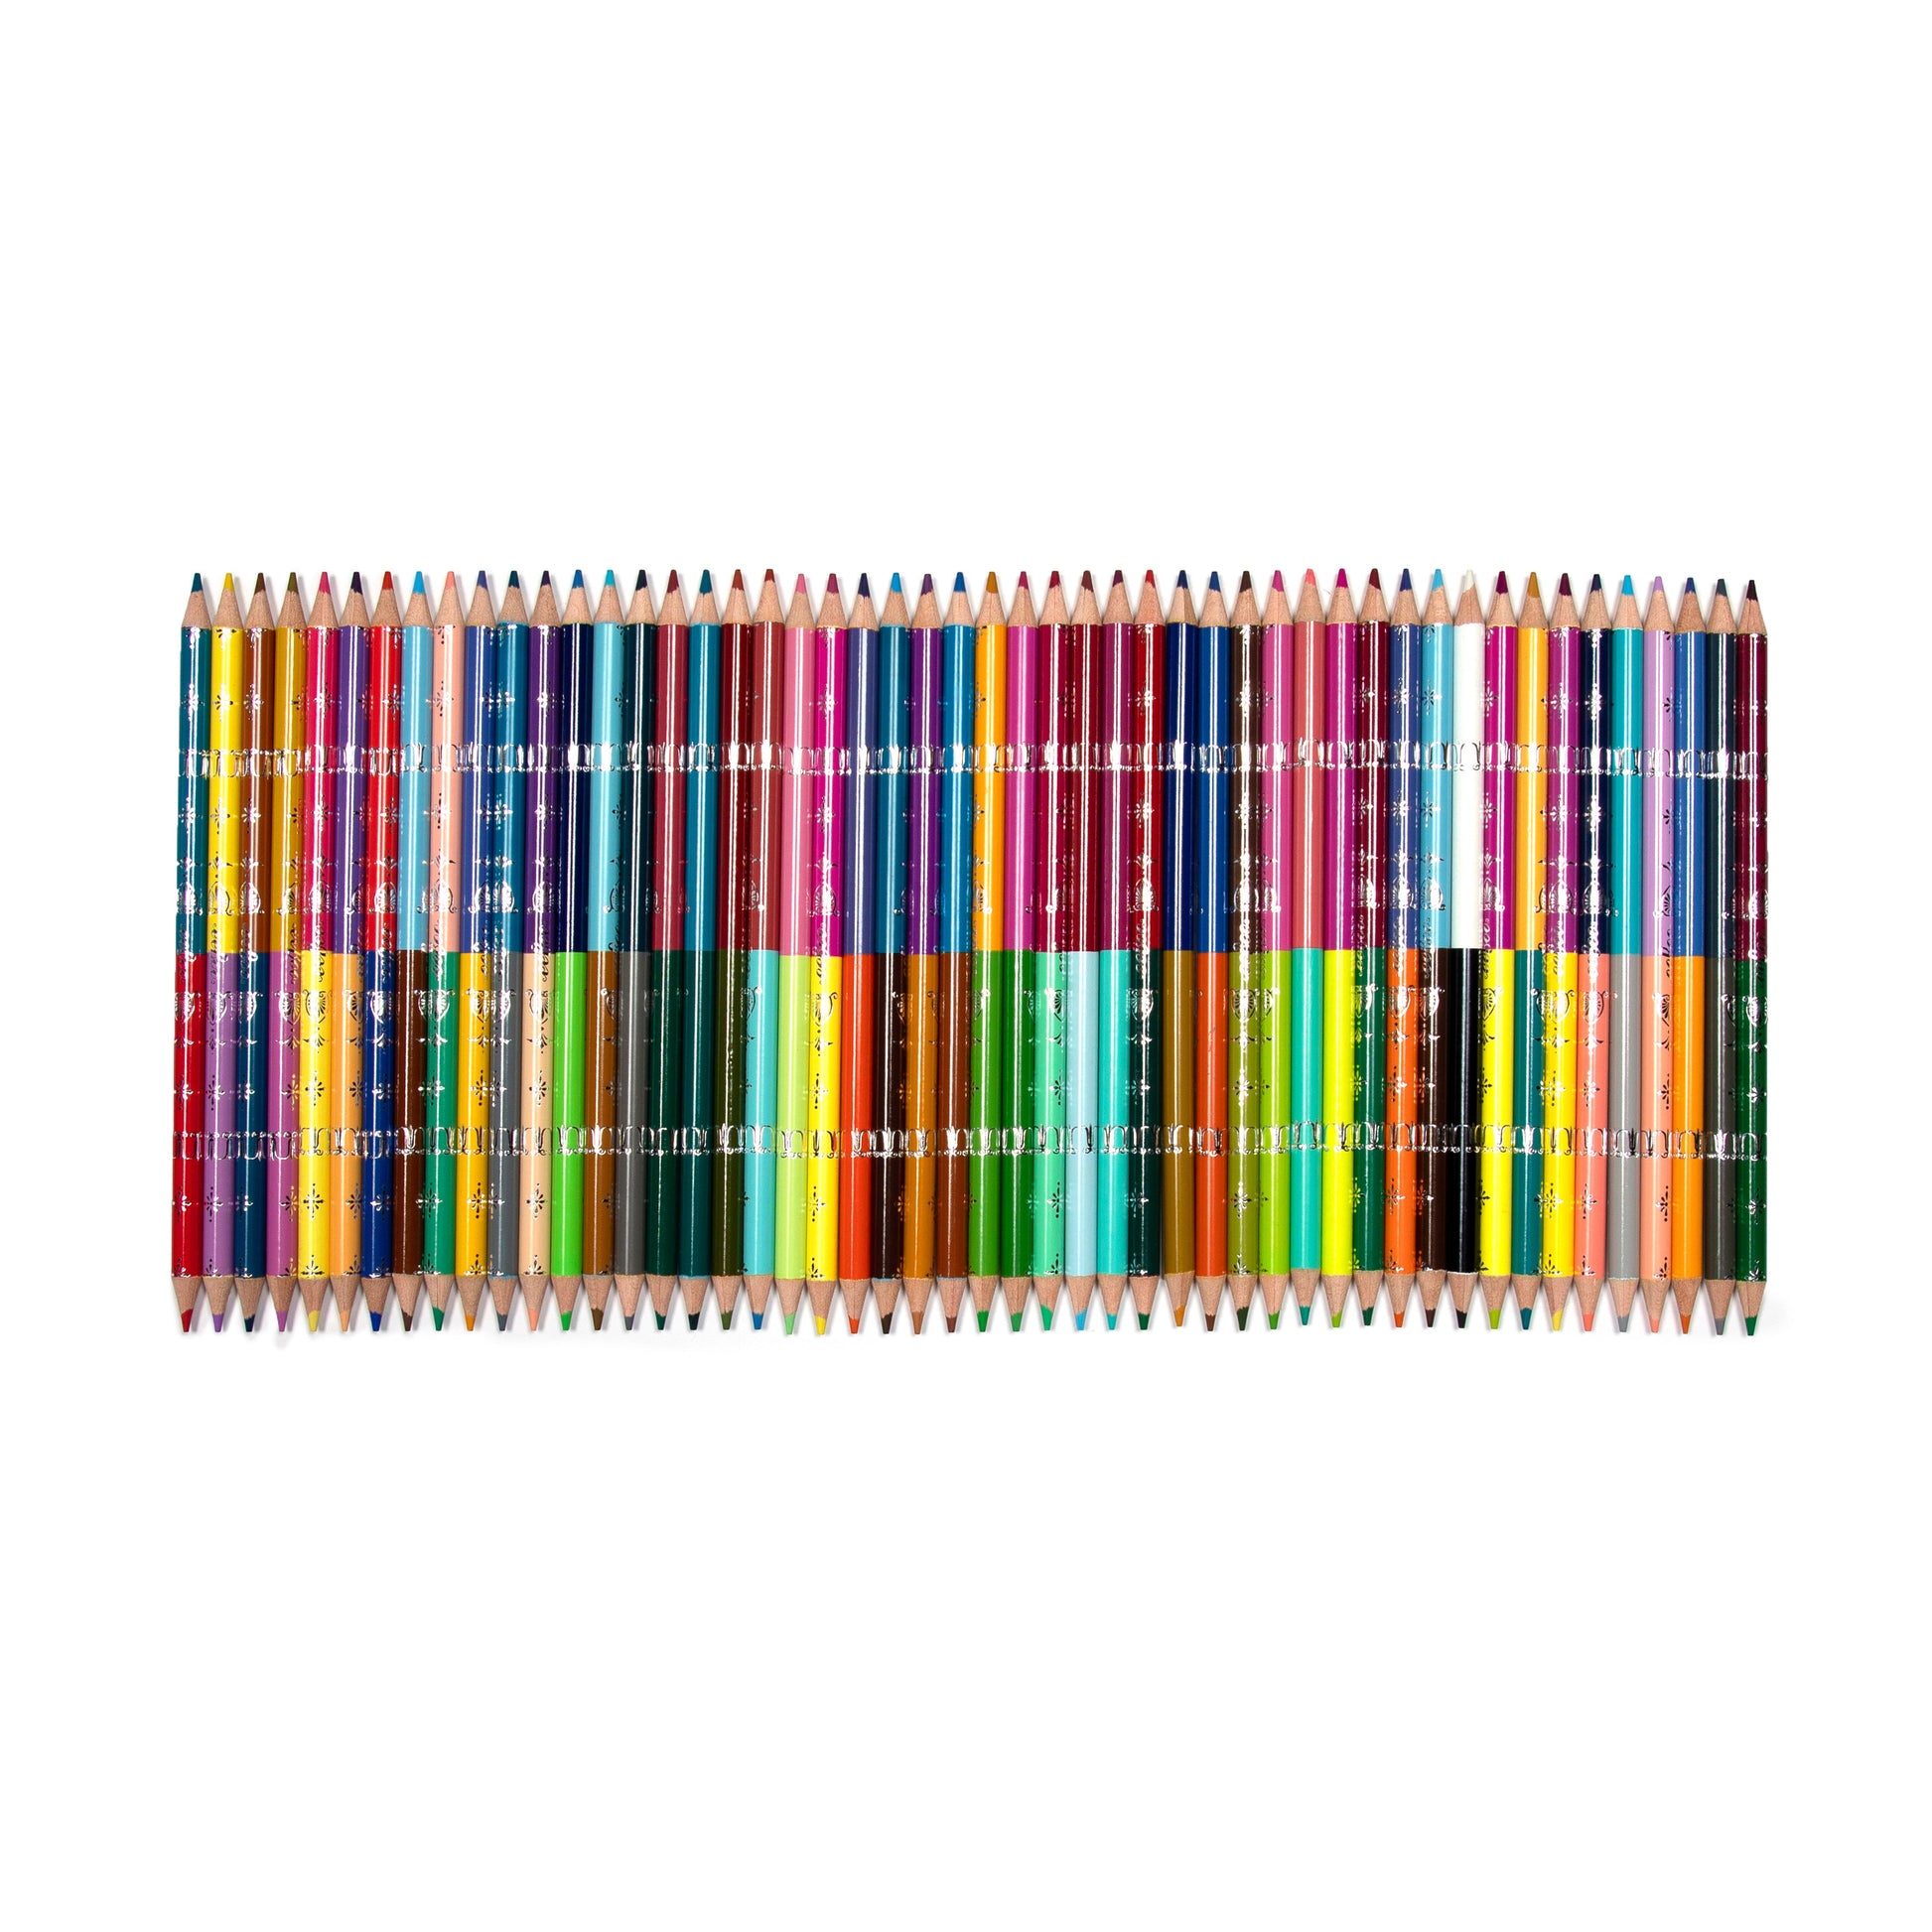 KuiiBoii 48 Color Colored Pencils, Suitable for Adults, Kids and